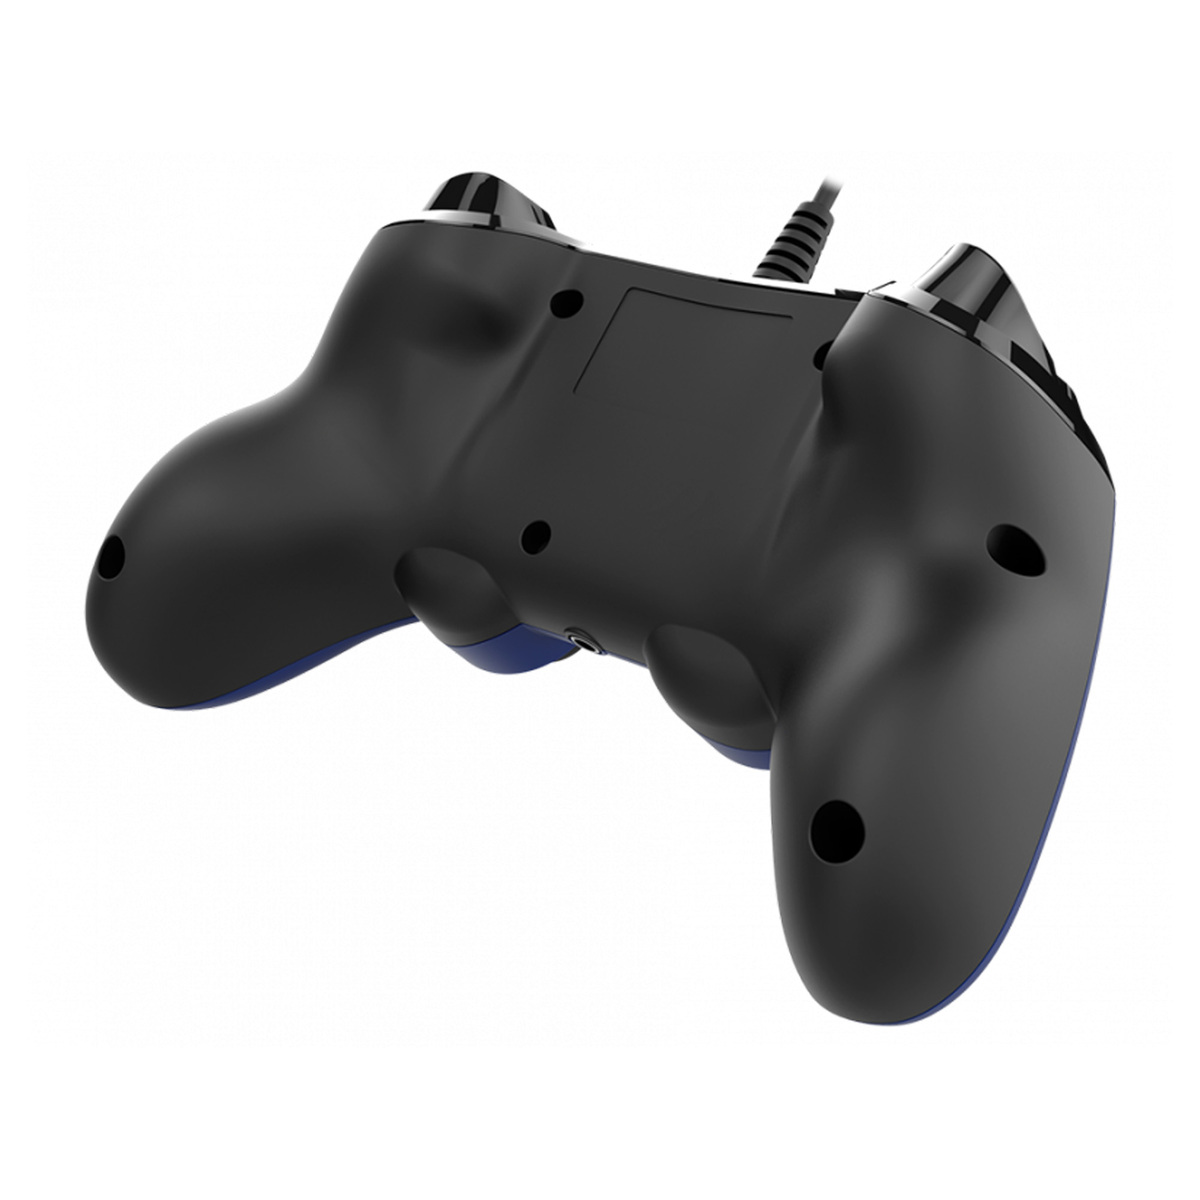 Nacon Wired Compact Controller (Blue) (Ps4) 00471